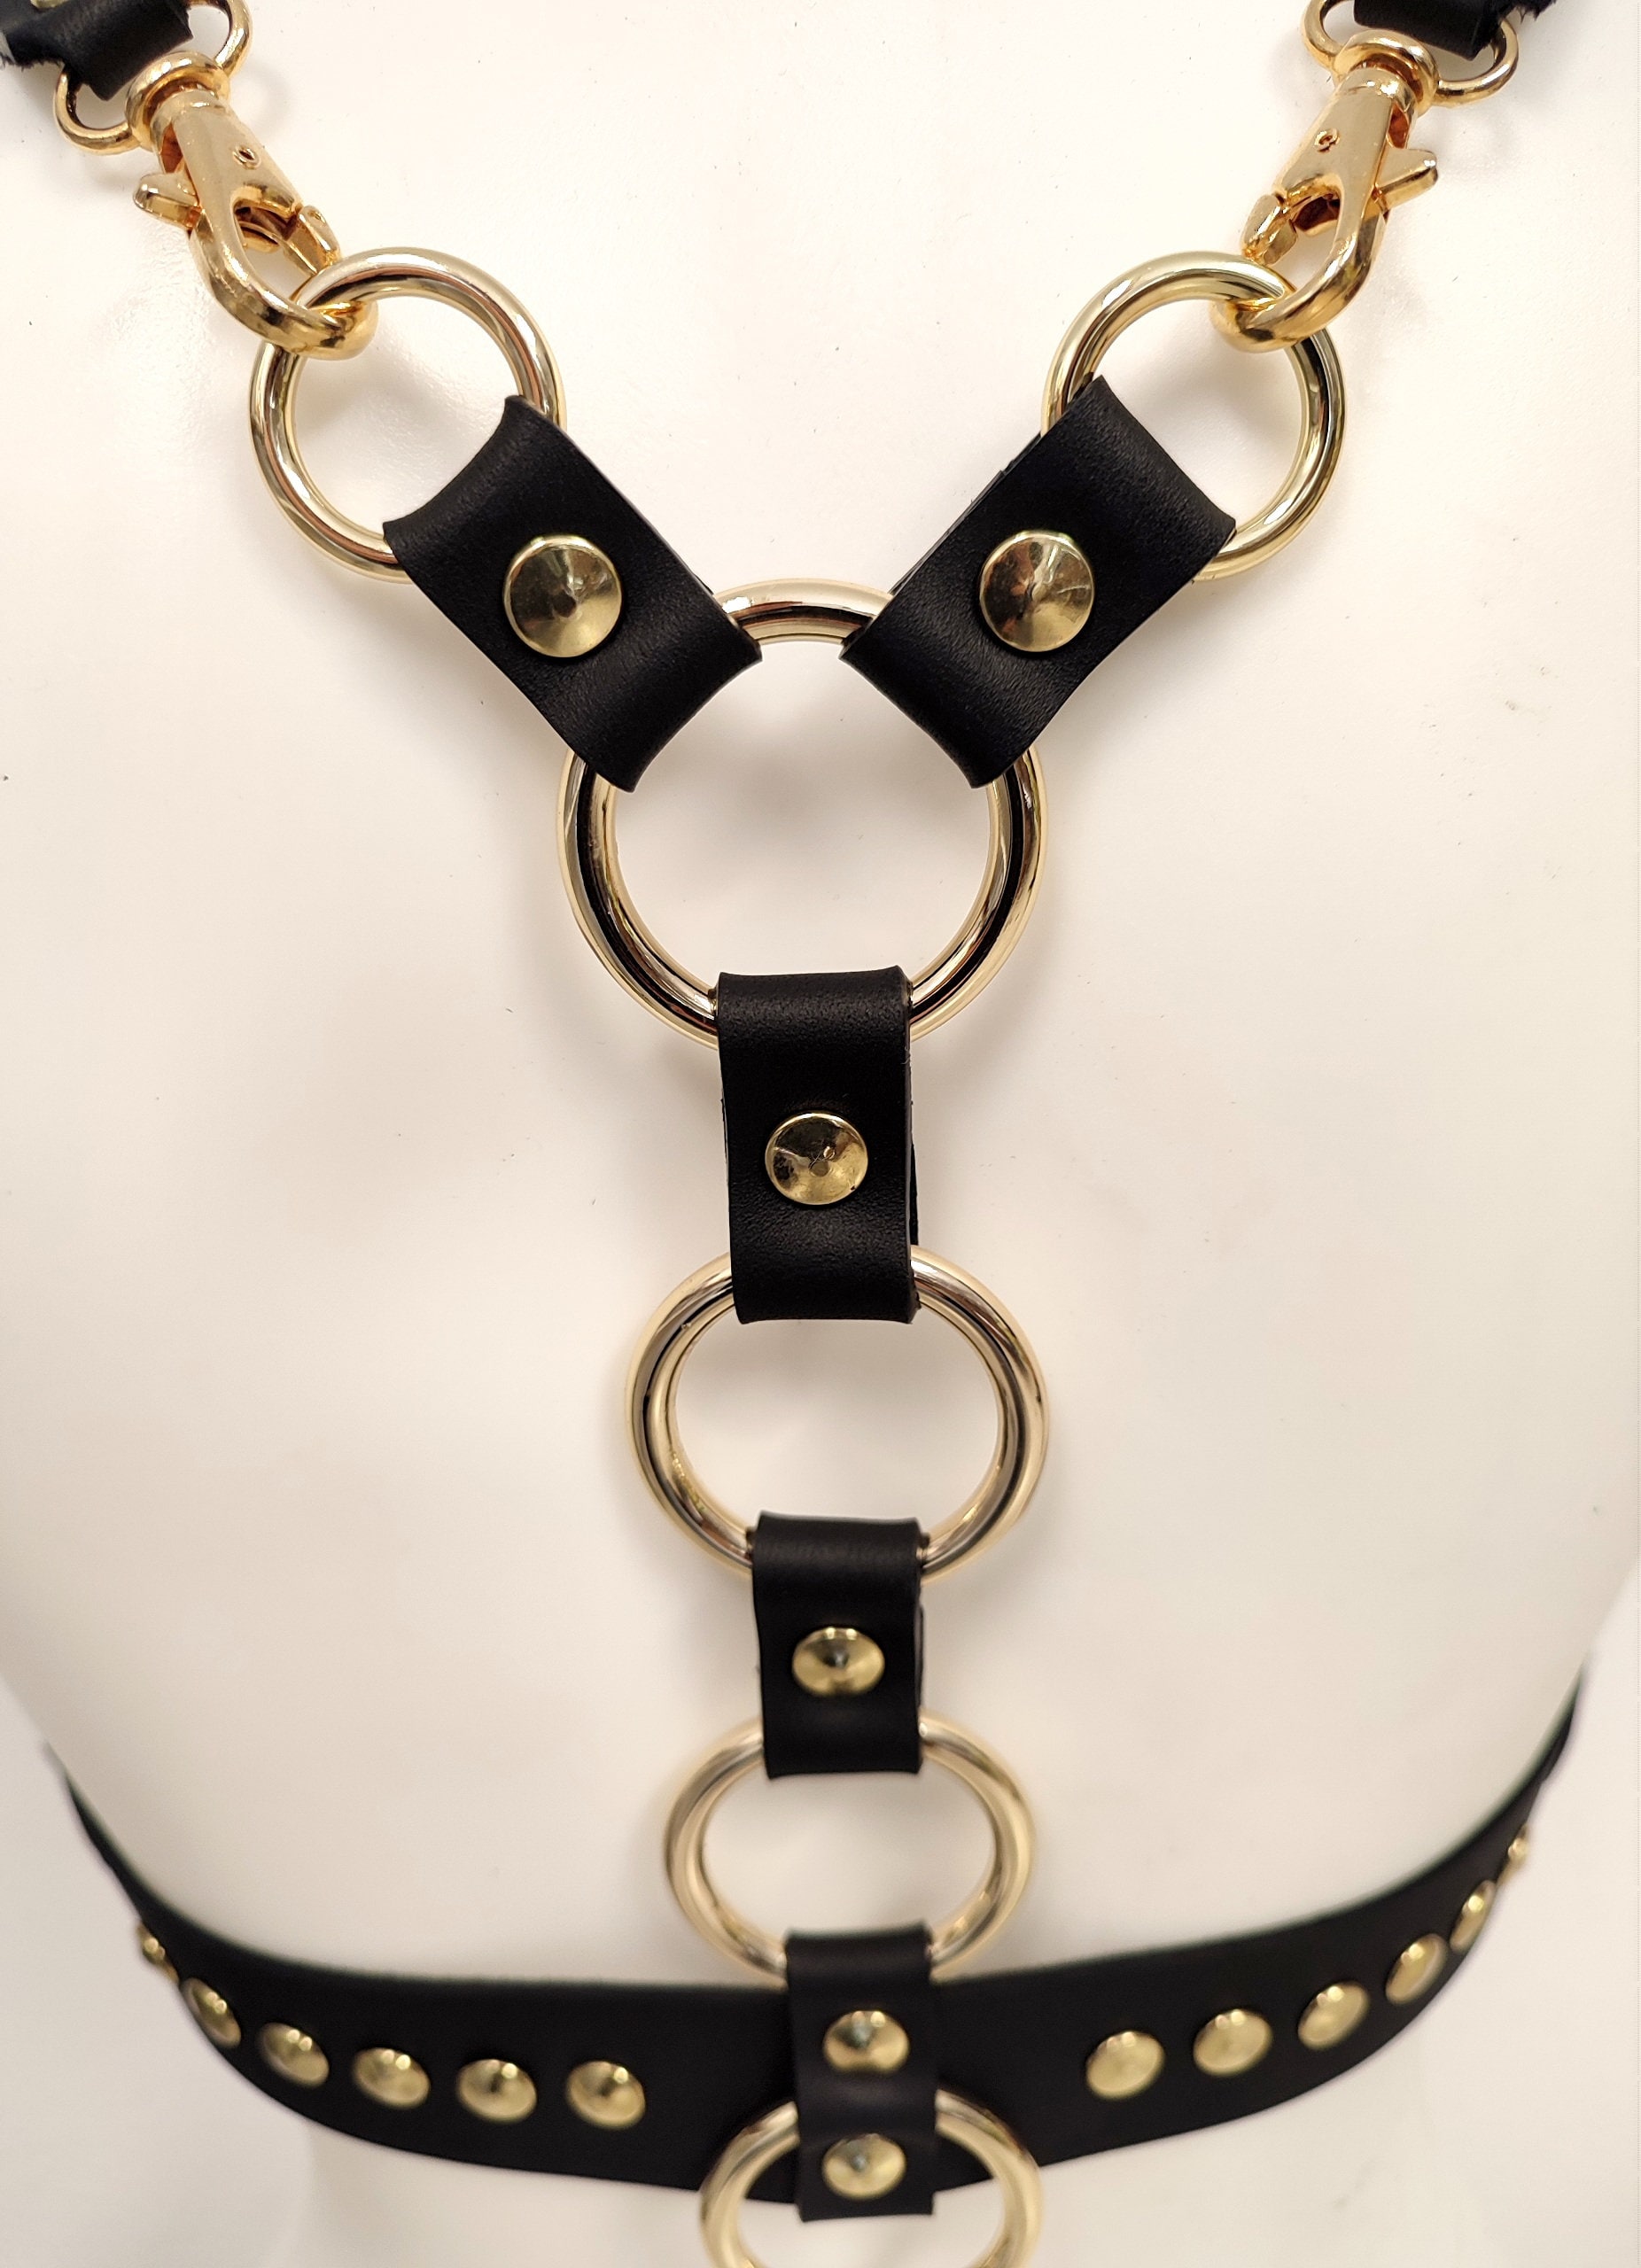 Grunge Goth Statement Leather Harness - Golden Color Hardware Harness photo